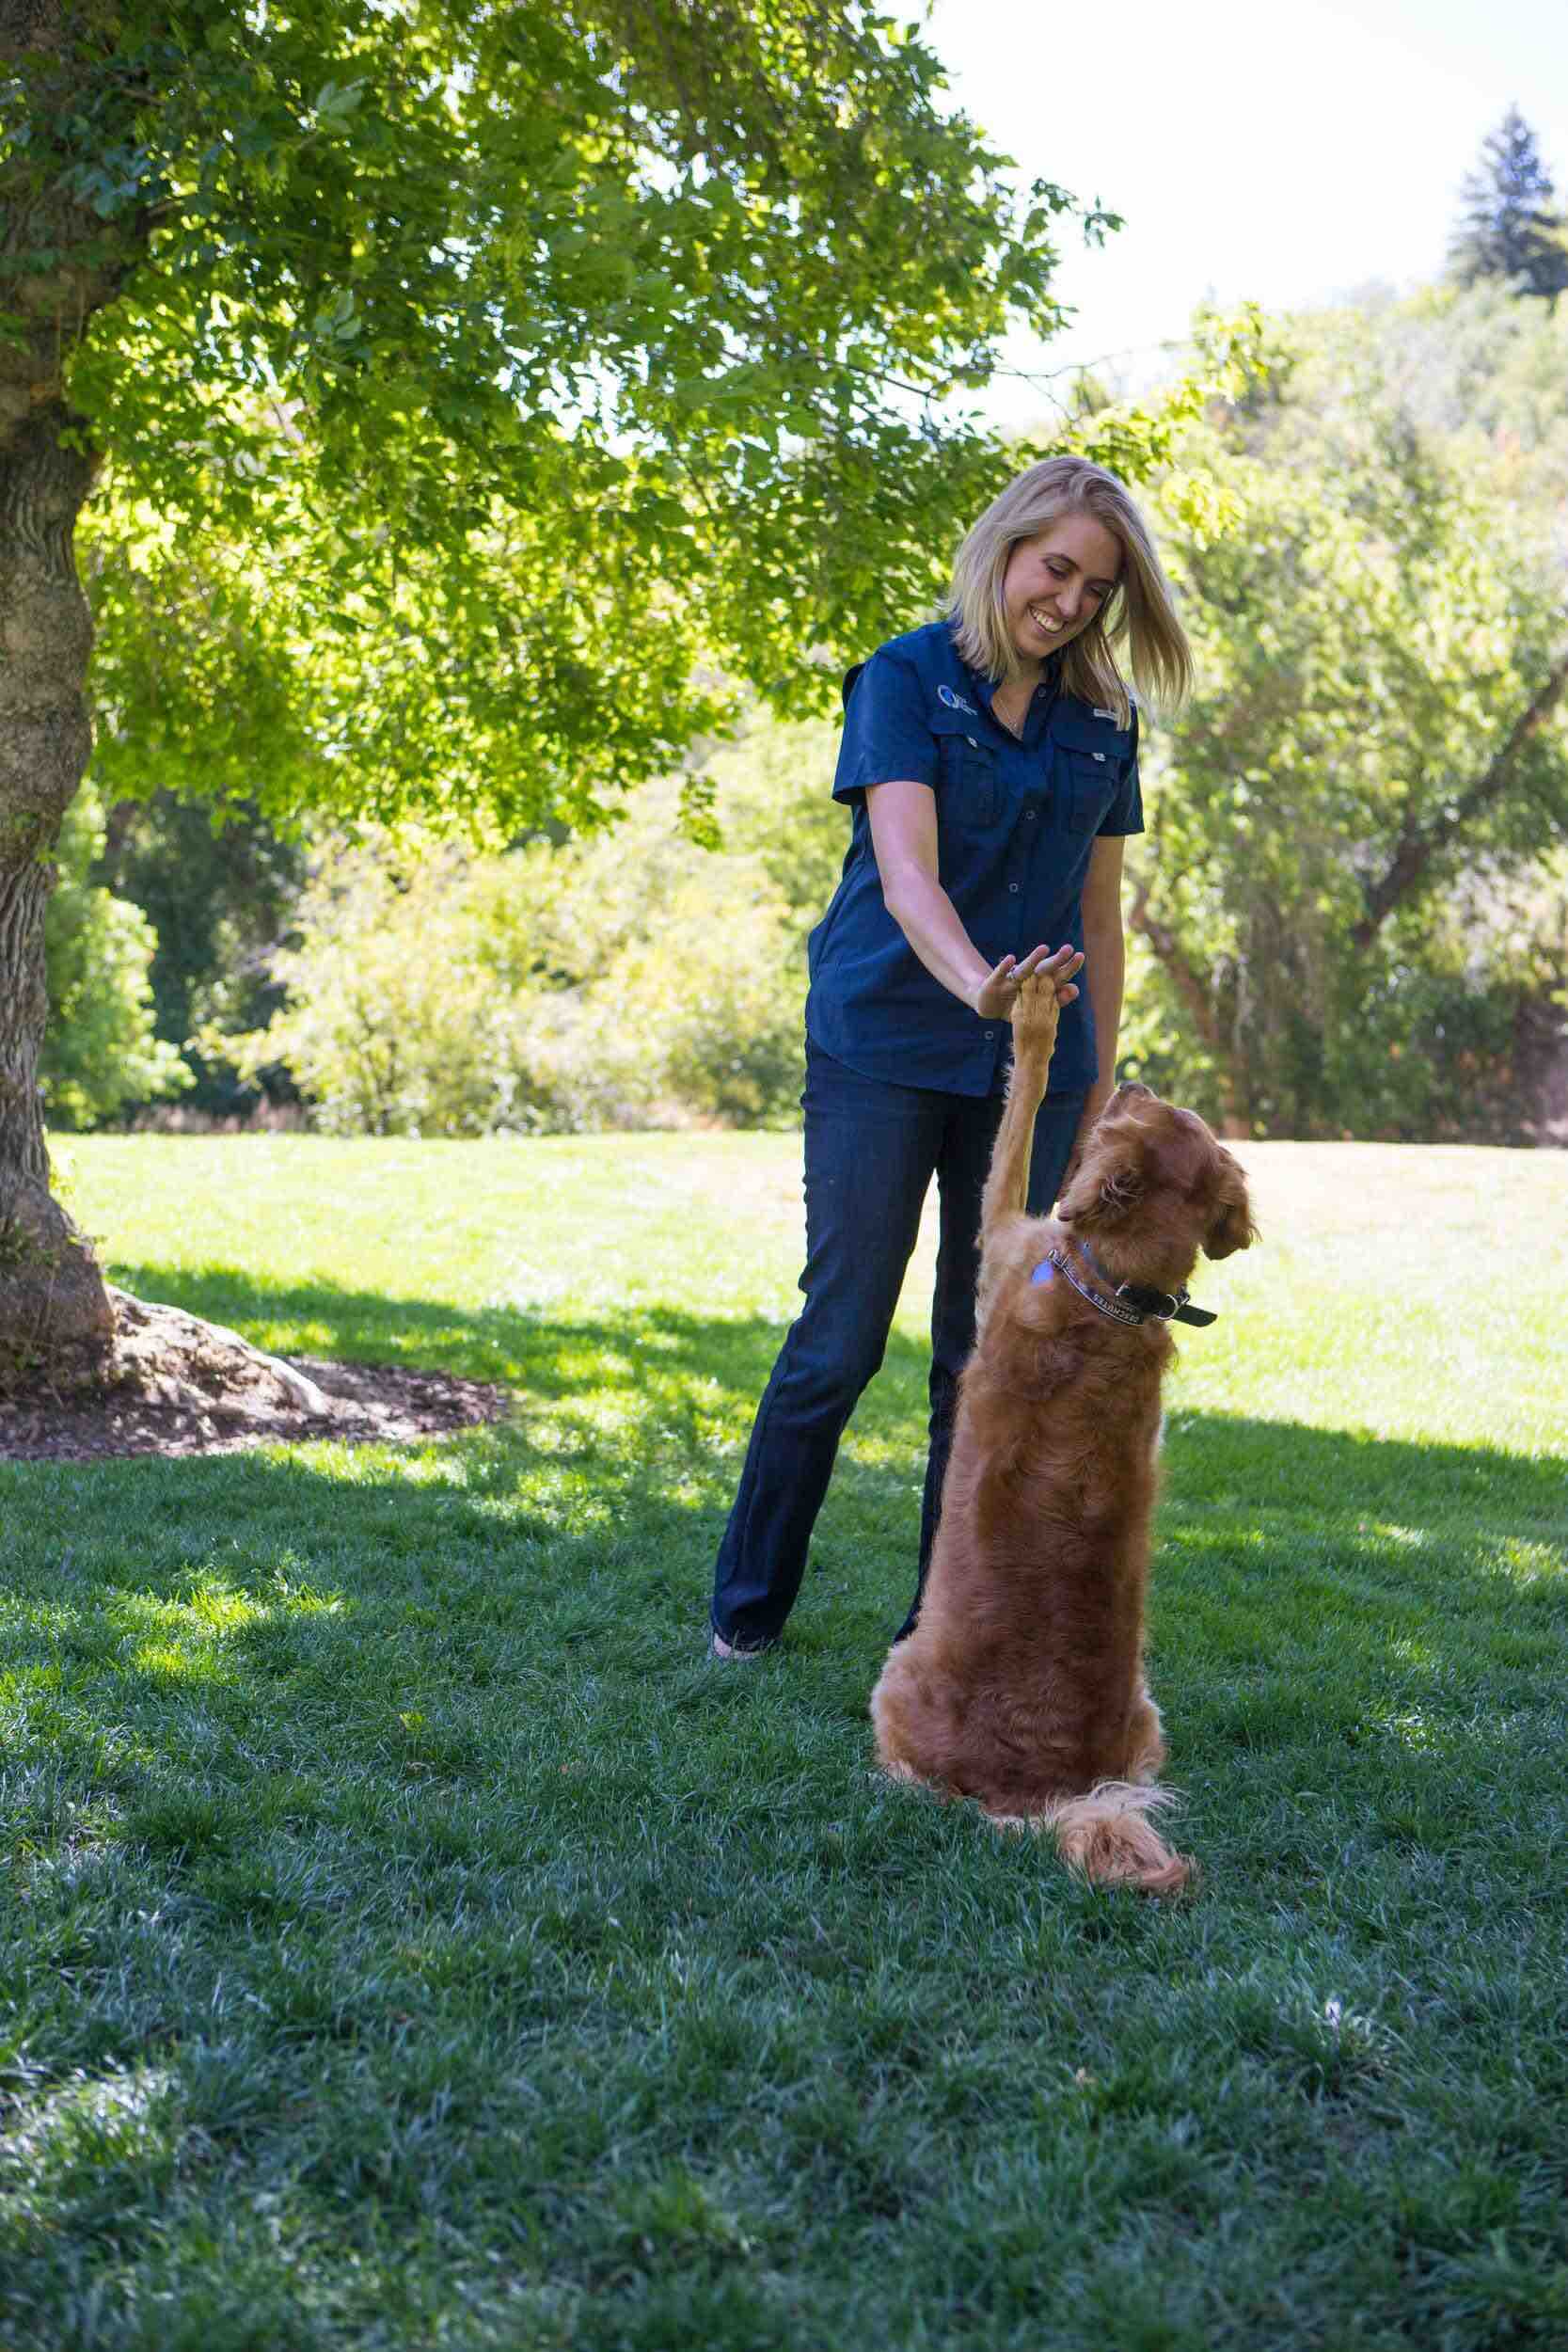 Dog Training Elite franchise owner kelley, showing off the amazing skills of a trained pup.